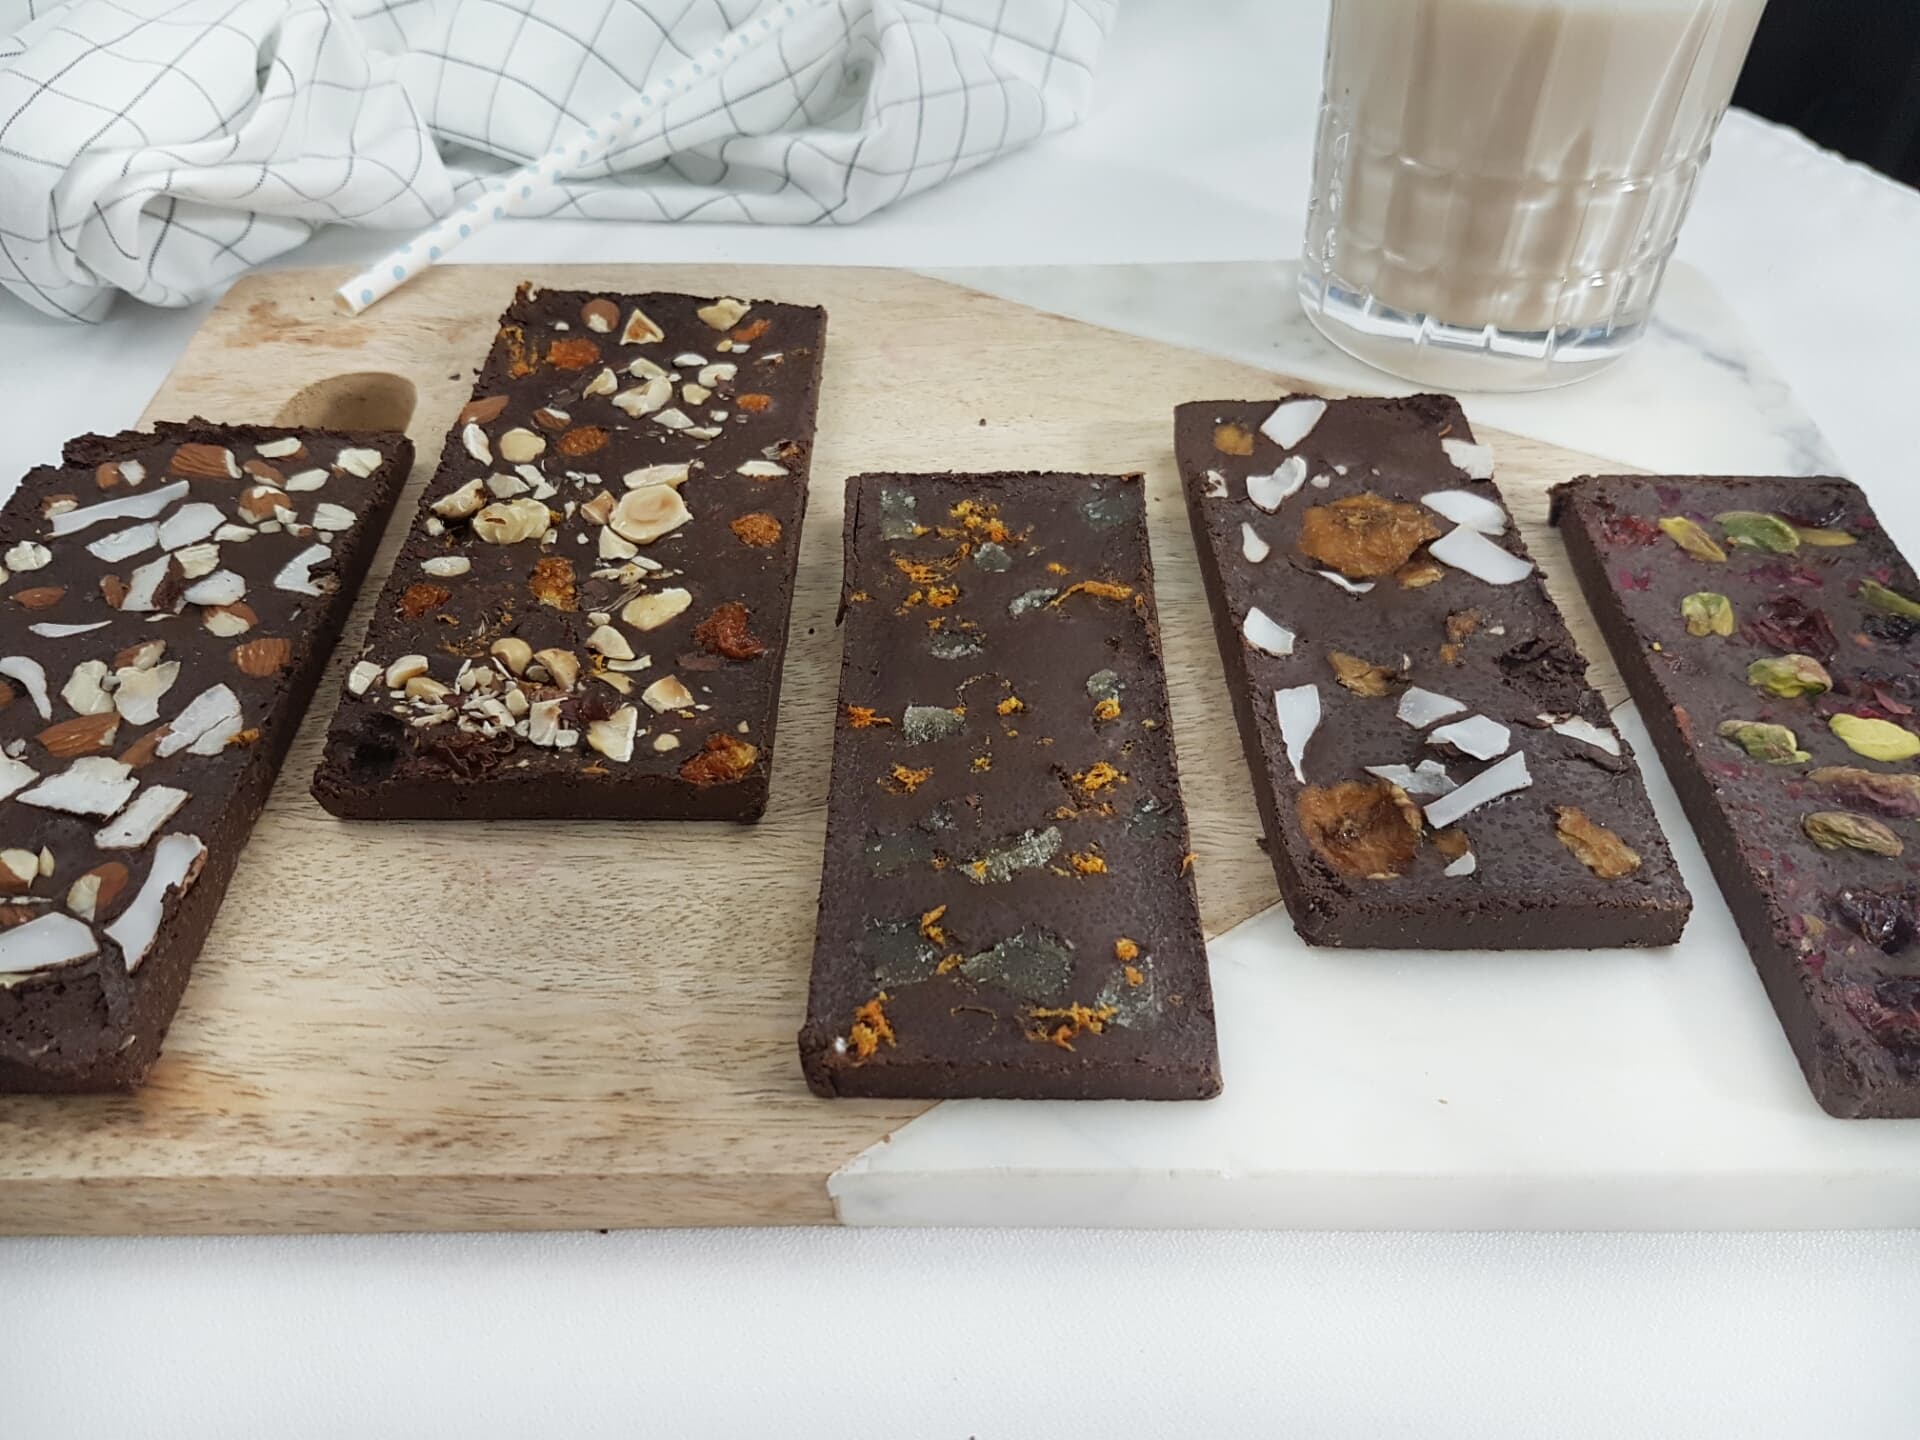 DIY Fruit, Nut and Flower Laced Chocolate Bars